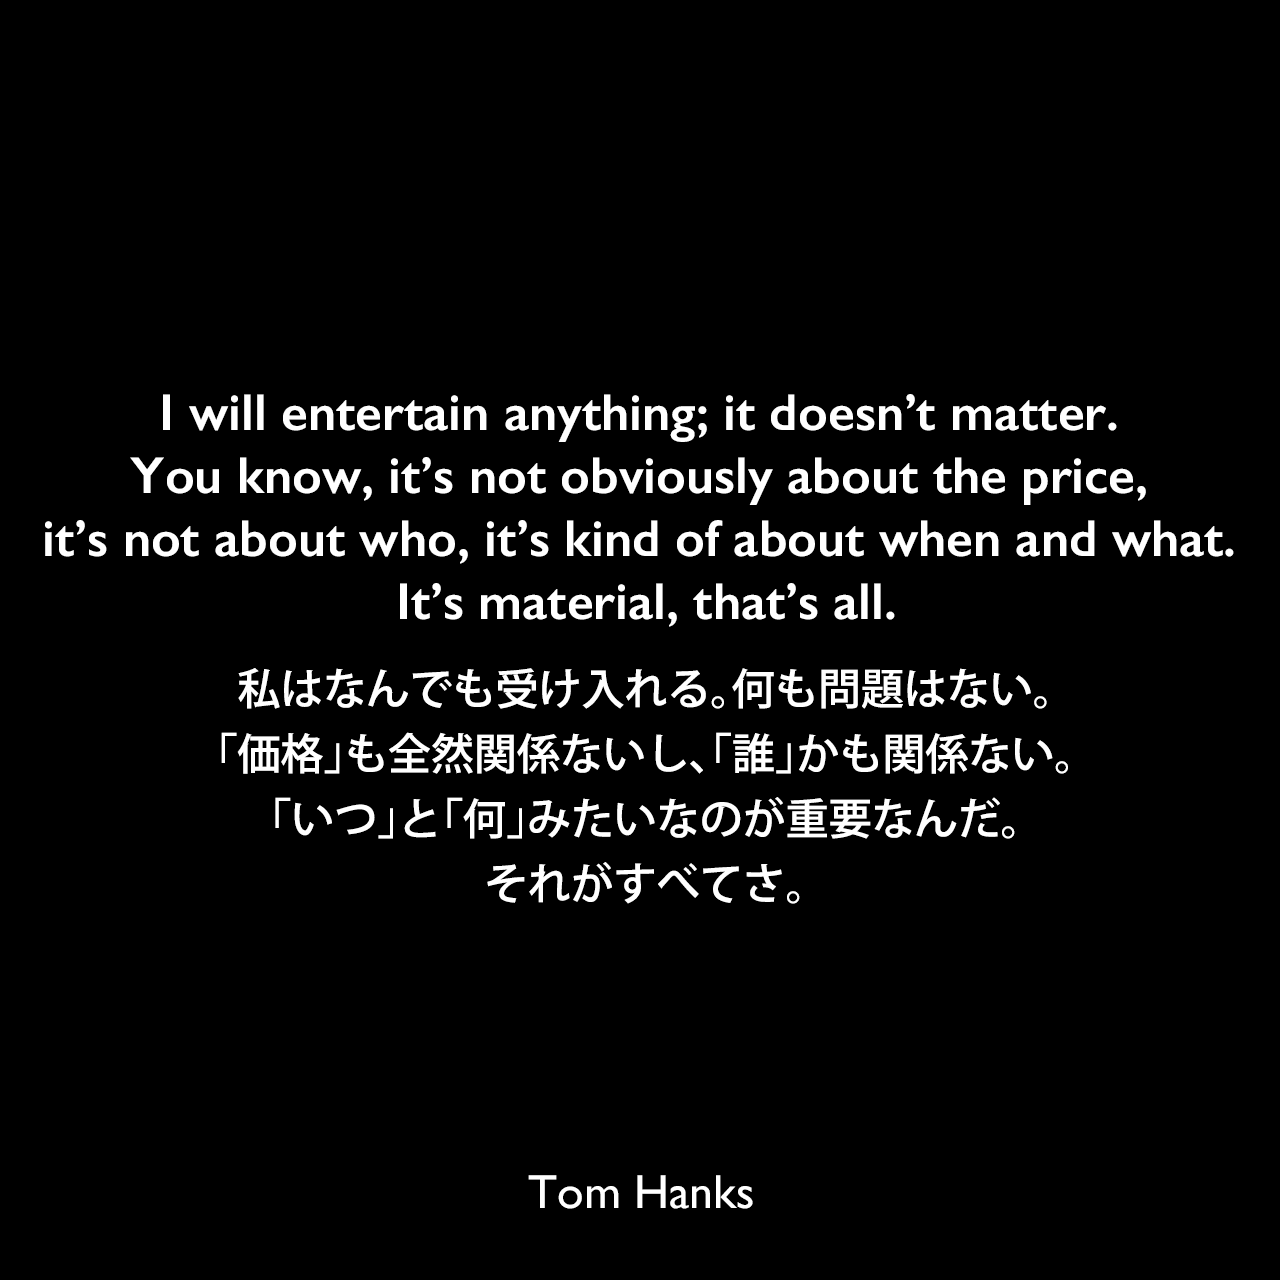 I will entertain anything; it doesn’t matter. You know, it’s not obviously about the price, it’s not about who, it’s kind of about when and what. It’s material, that’s all.私はなんでも受け入れる。何も問題はない。「価格」も全然関係ないし、「誰」かも関係ない。「いつ」と「何」みたいなのが重要なんだ。それがすべてさ。Tom Hanks